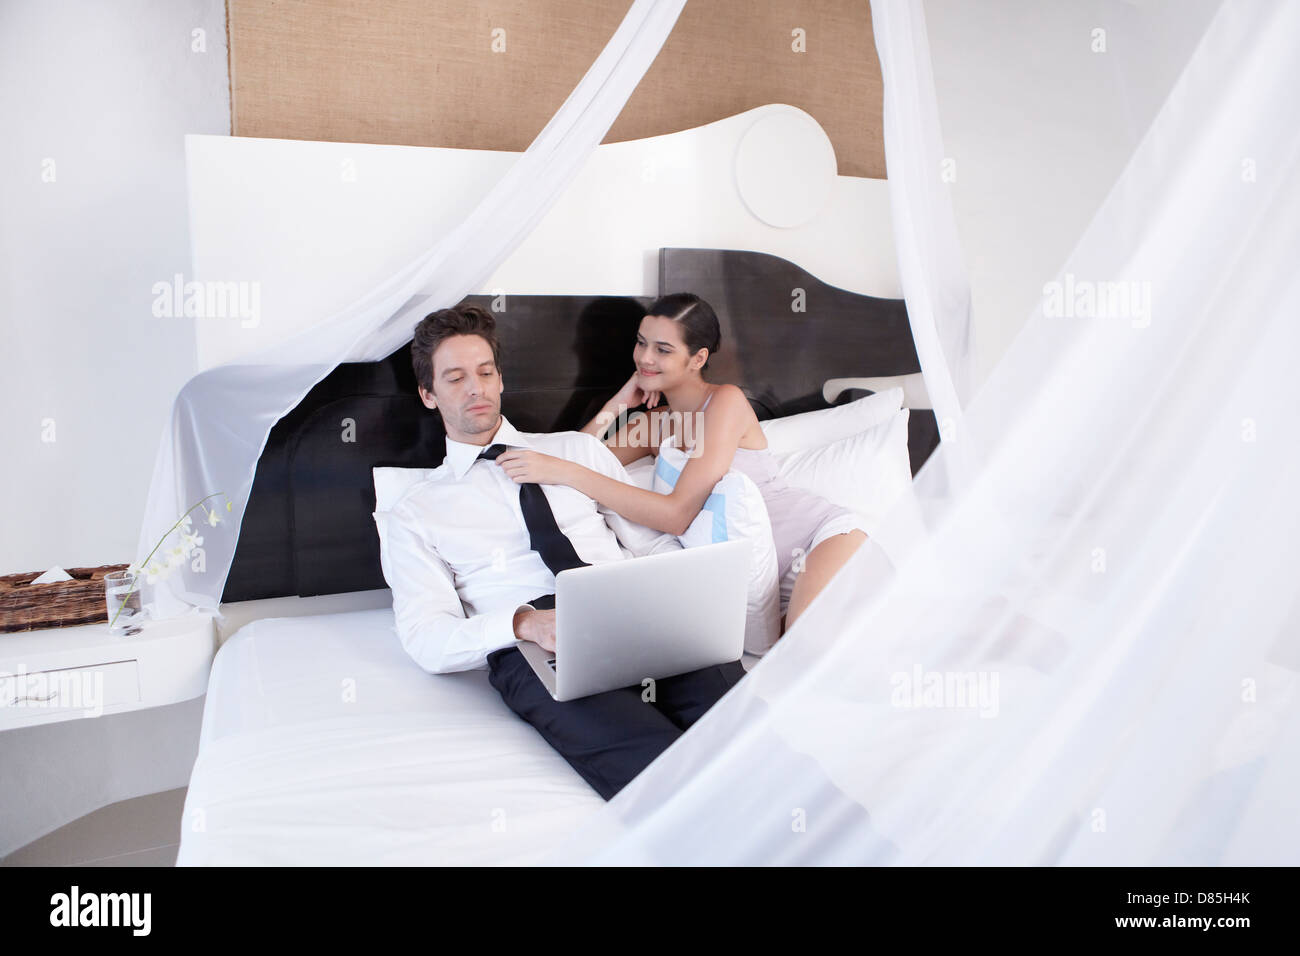 young couple sitting on bed laptop. Stock Photo